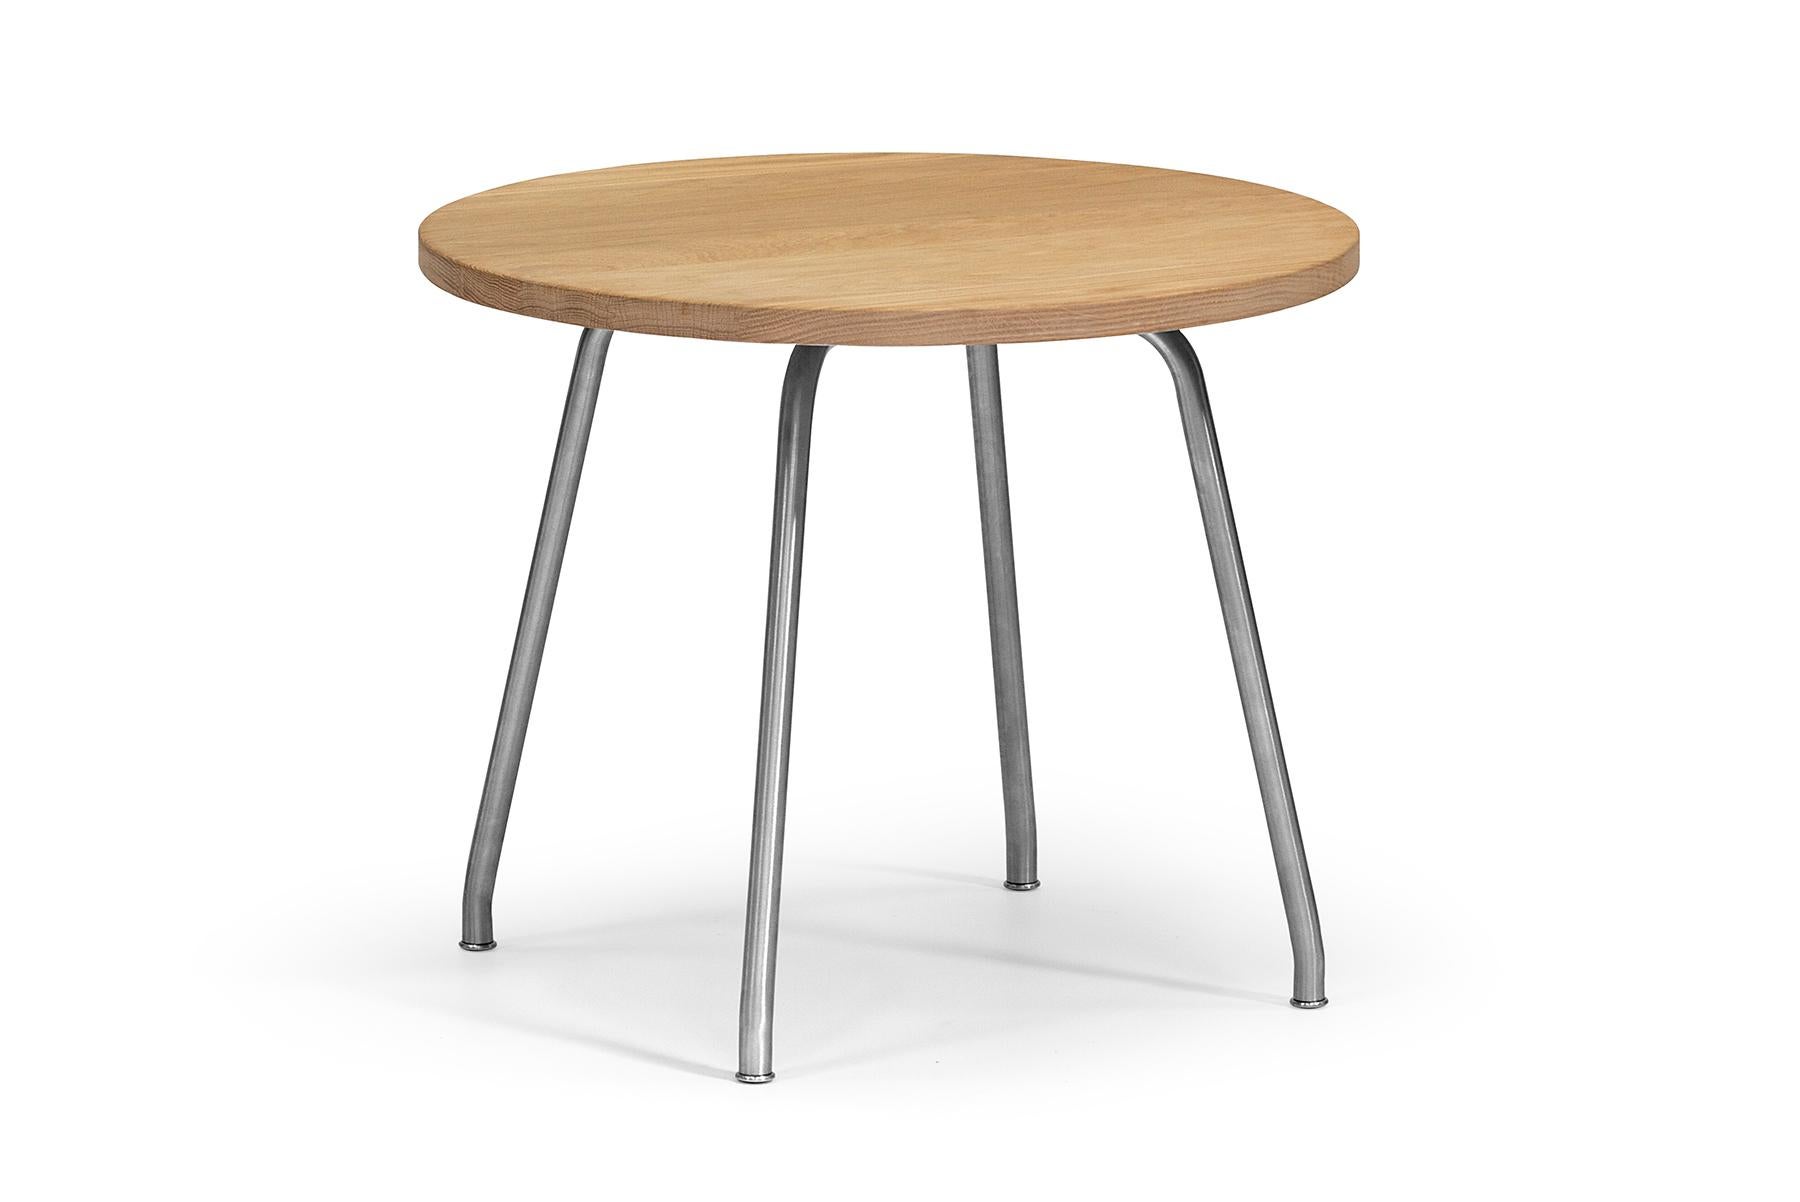 The CH415 coffee table was created by Hans J. Wegner in 1990 and shows the designer at his minimalist best with its clean, round tabletop and slender legs.
 